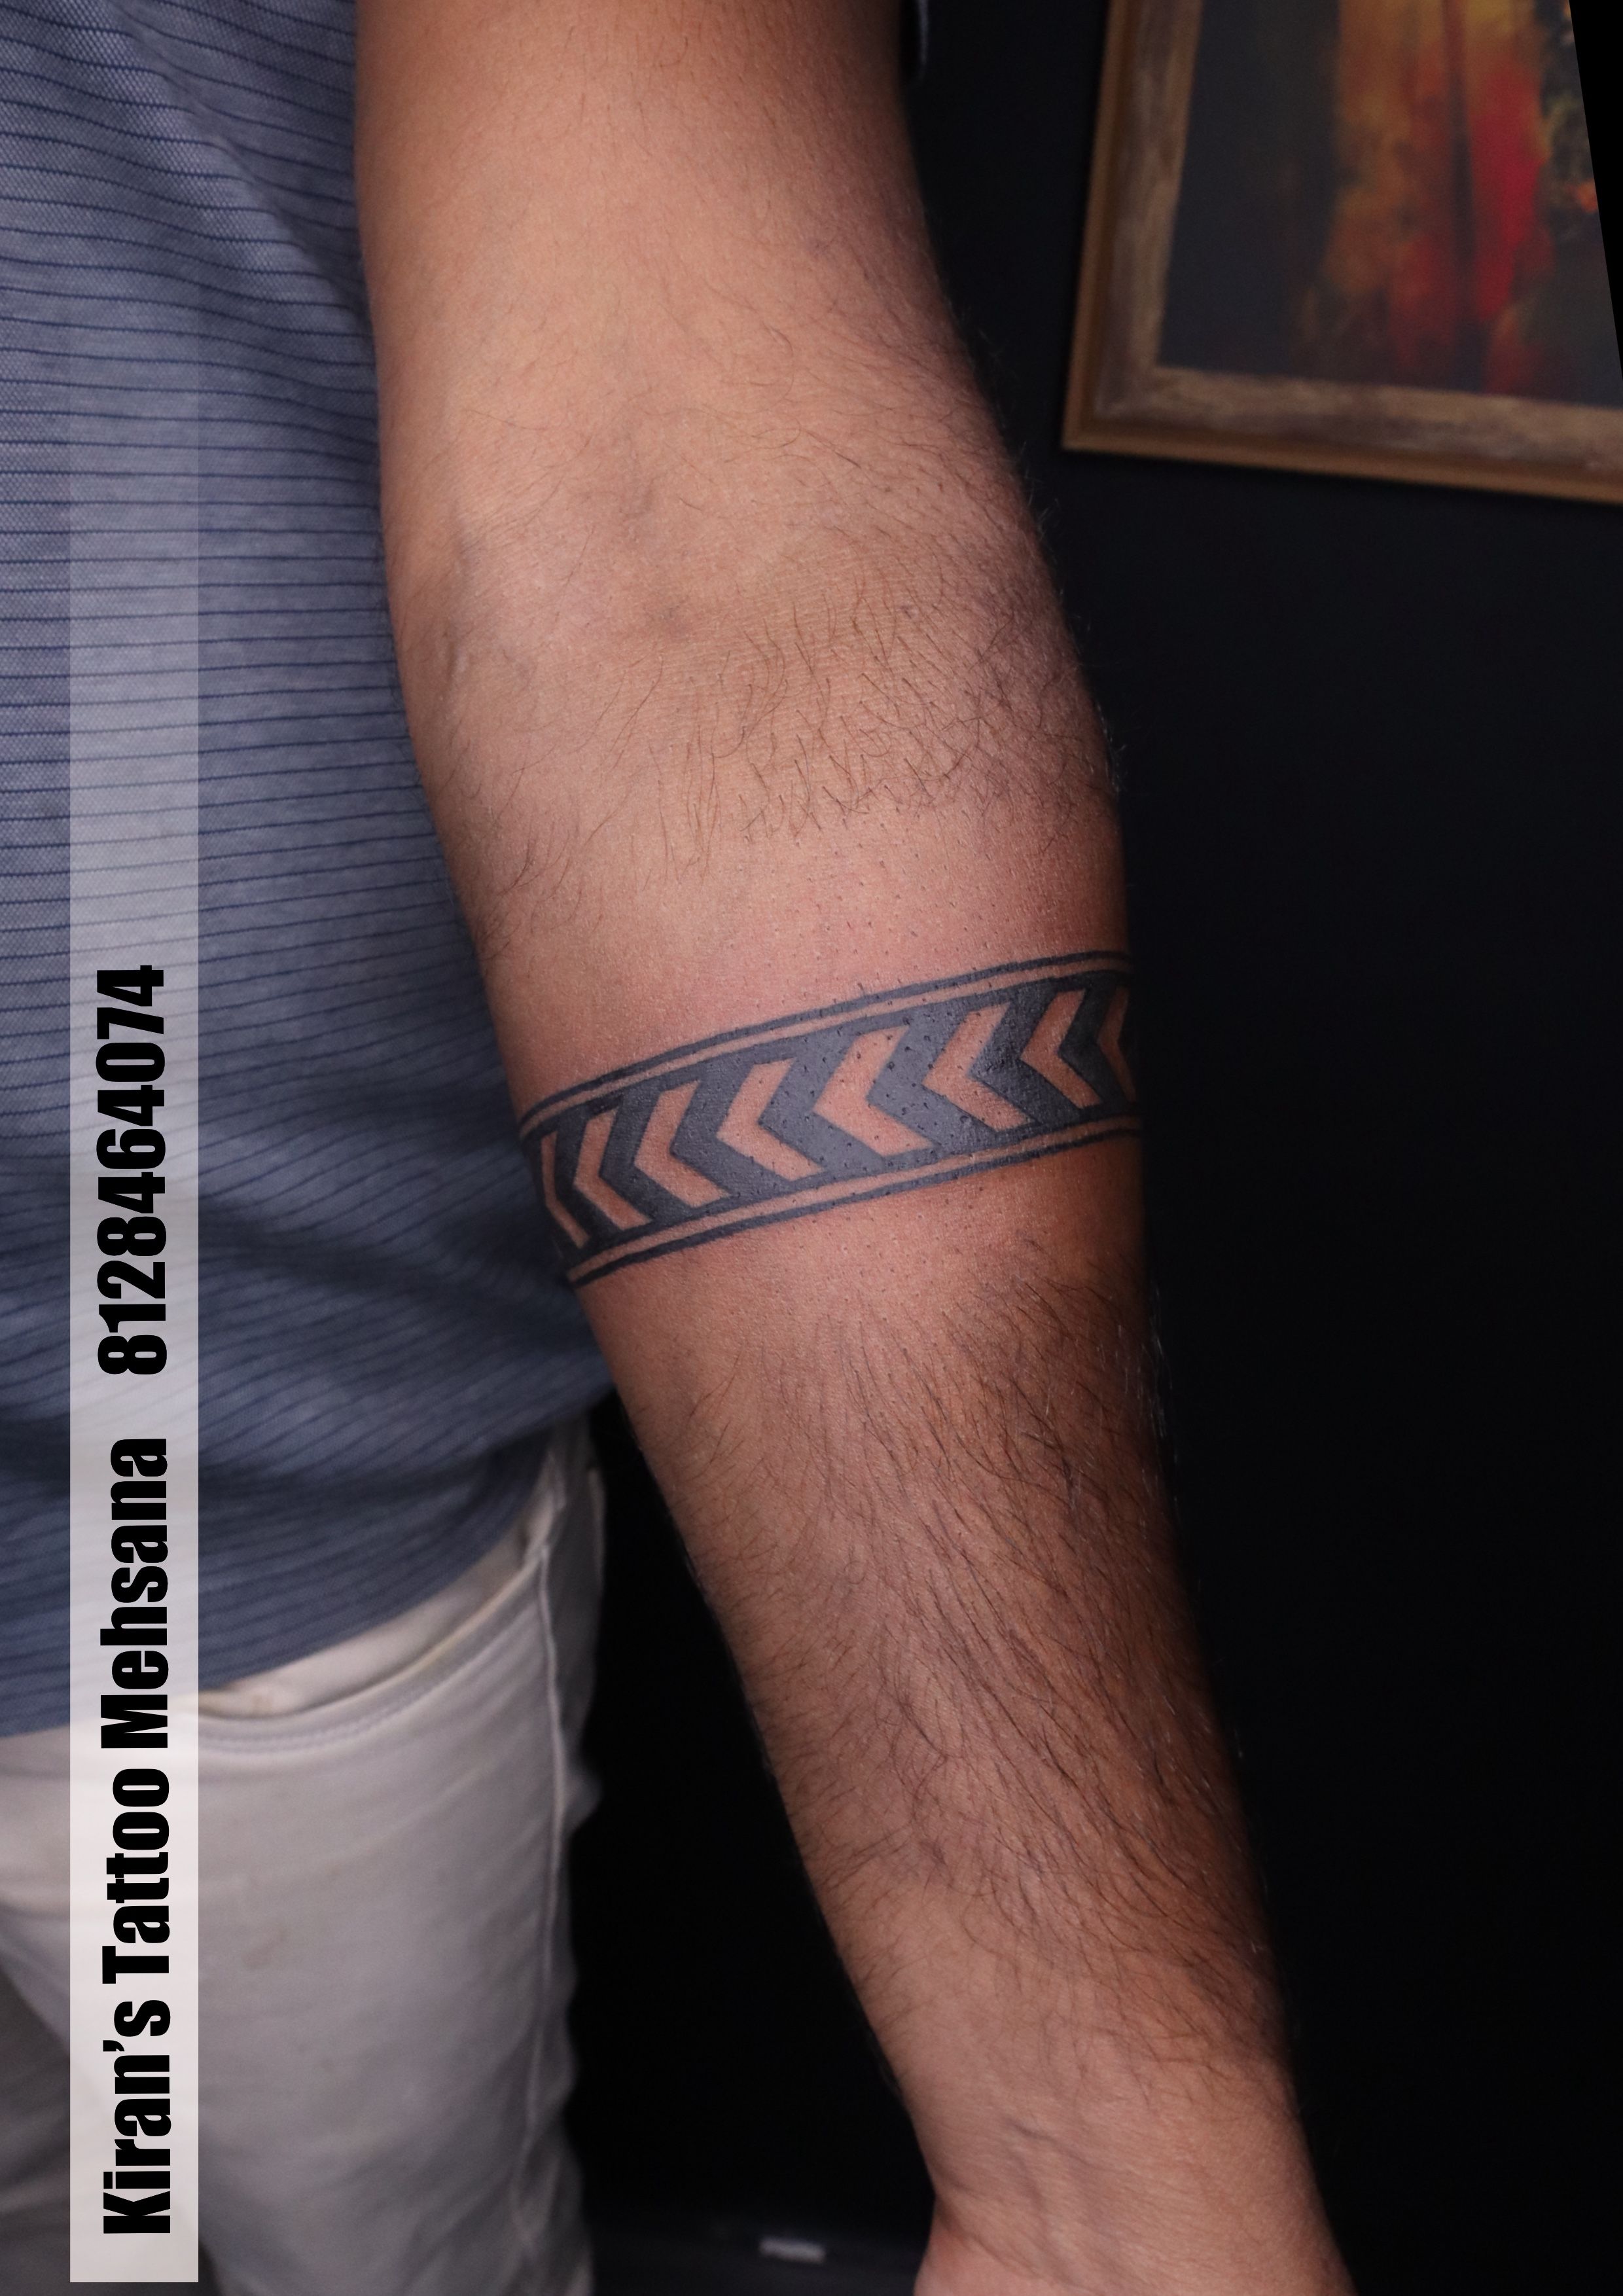 First tattoo. I'm Greek and want to start with a Greek arm band, eventually  a whole black and white sleeve. Thoughts? : r/tattooadvice